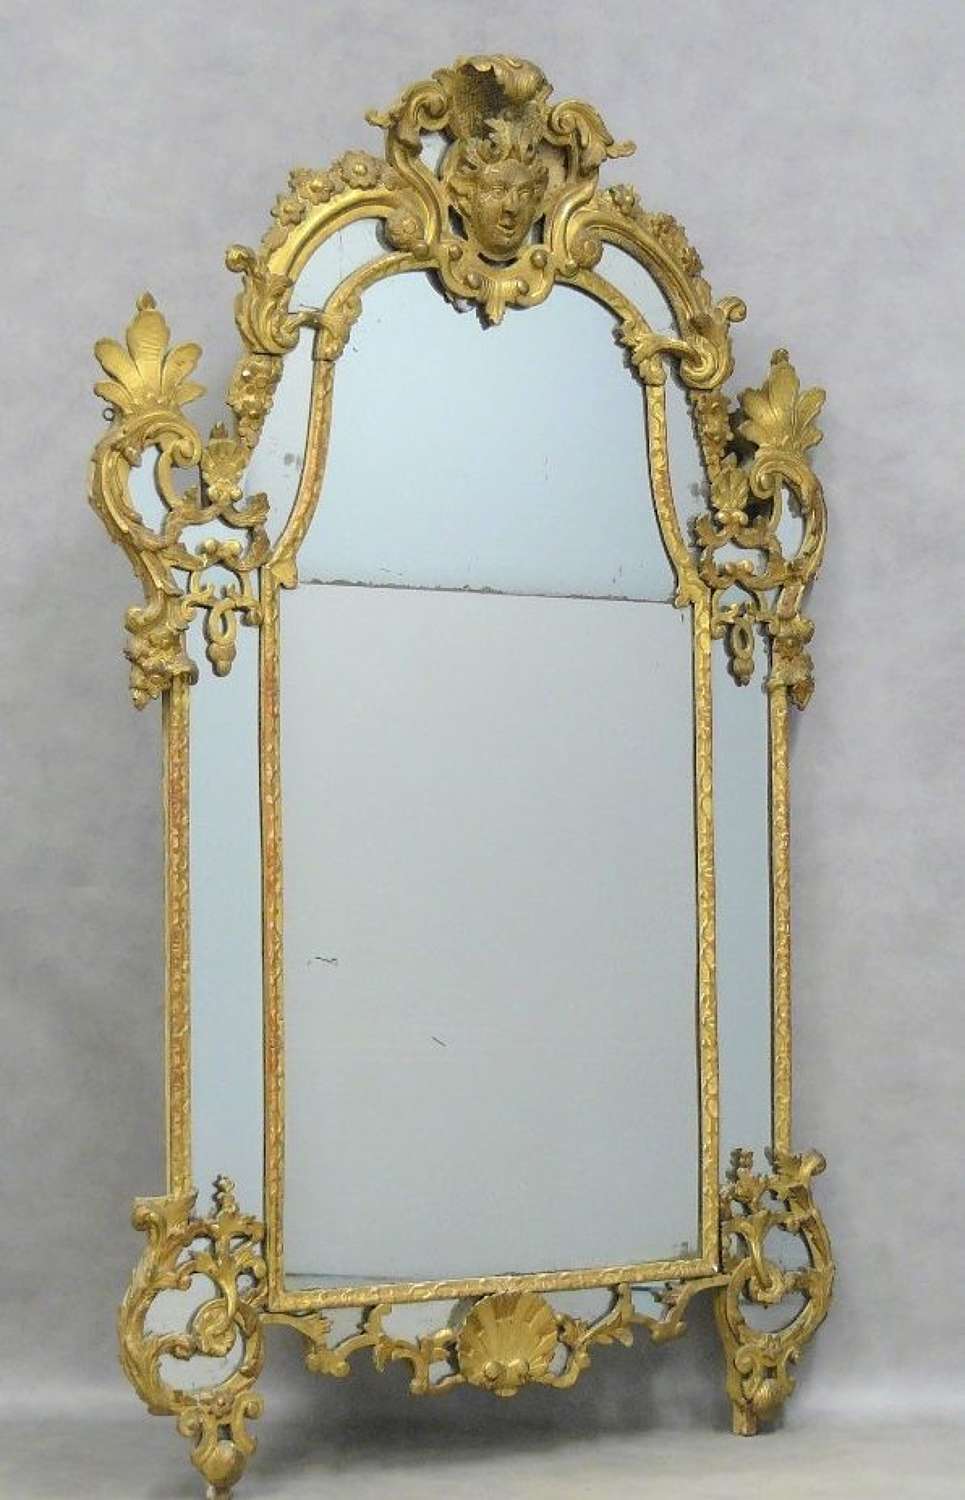 AN IMPORTANT REGENCE PERIOD CARVED GILTWOOD MIRROR